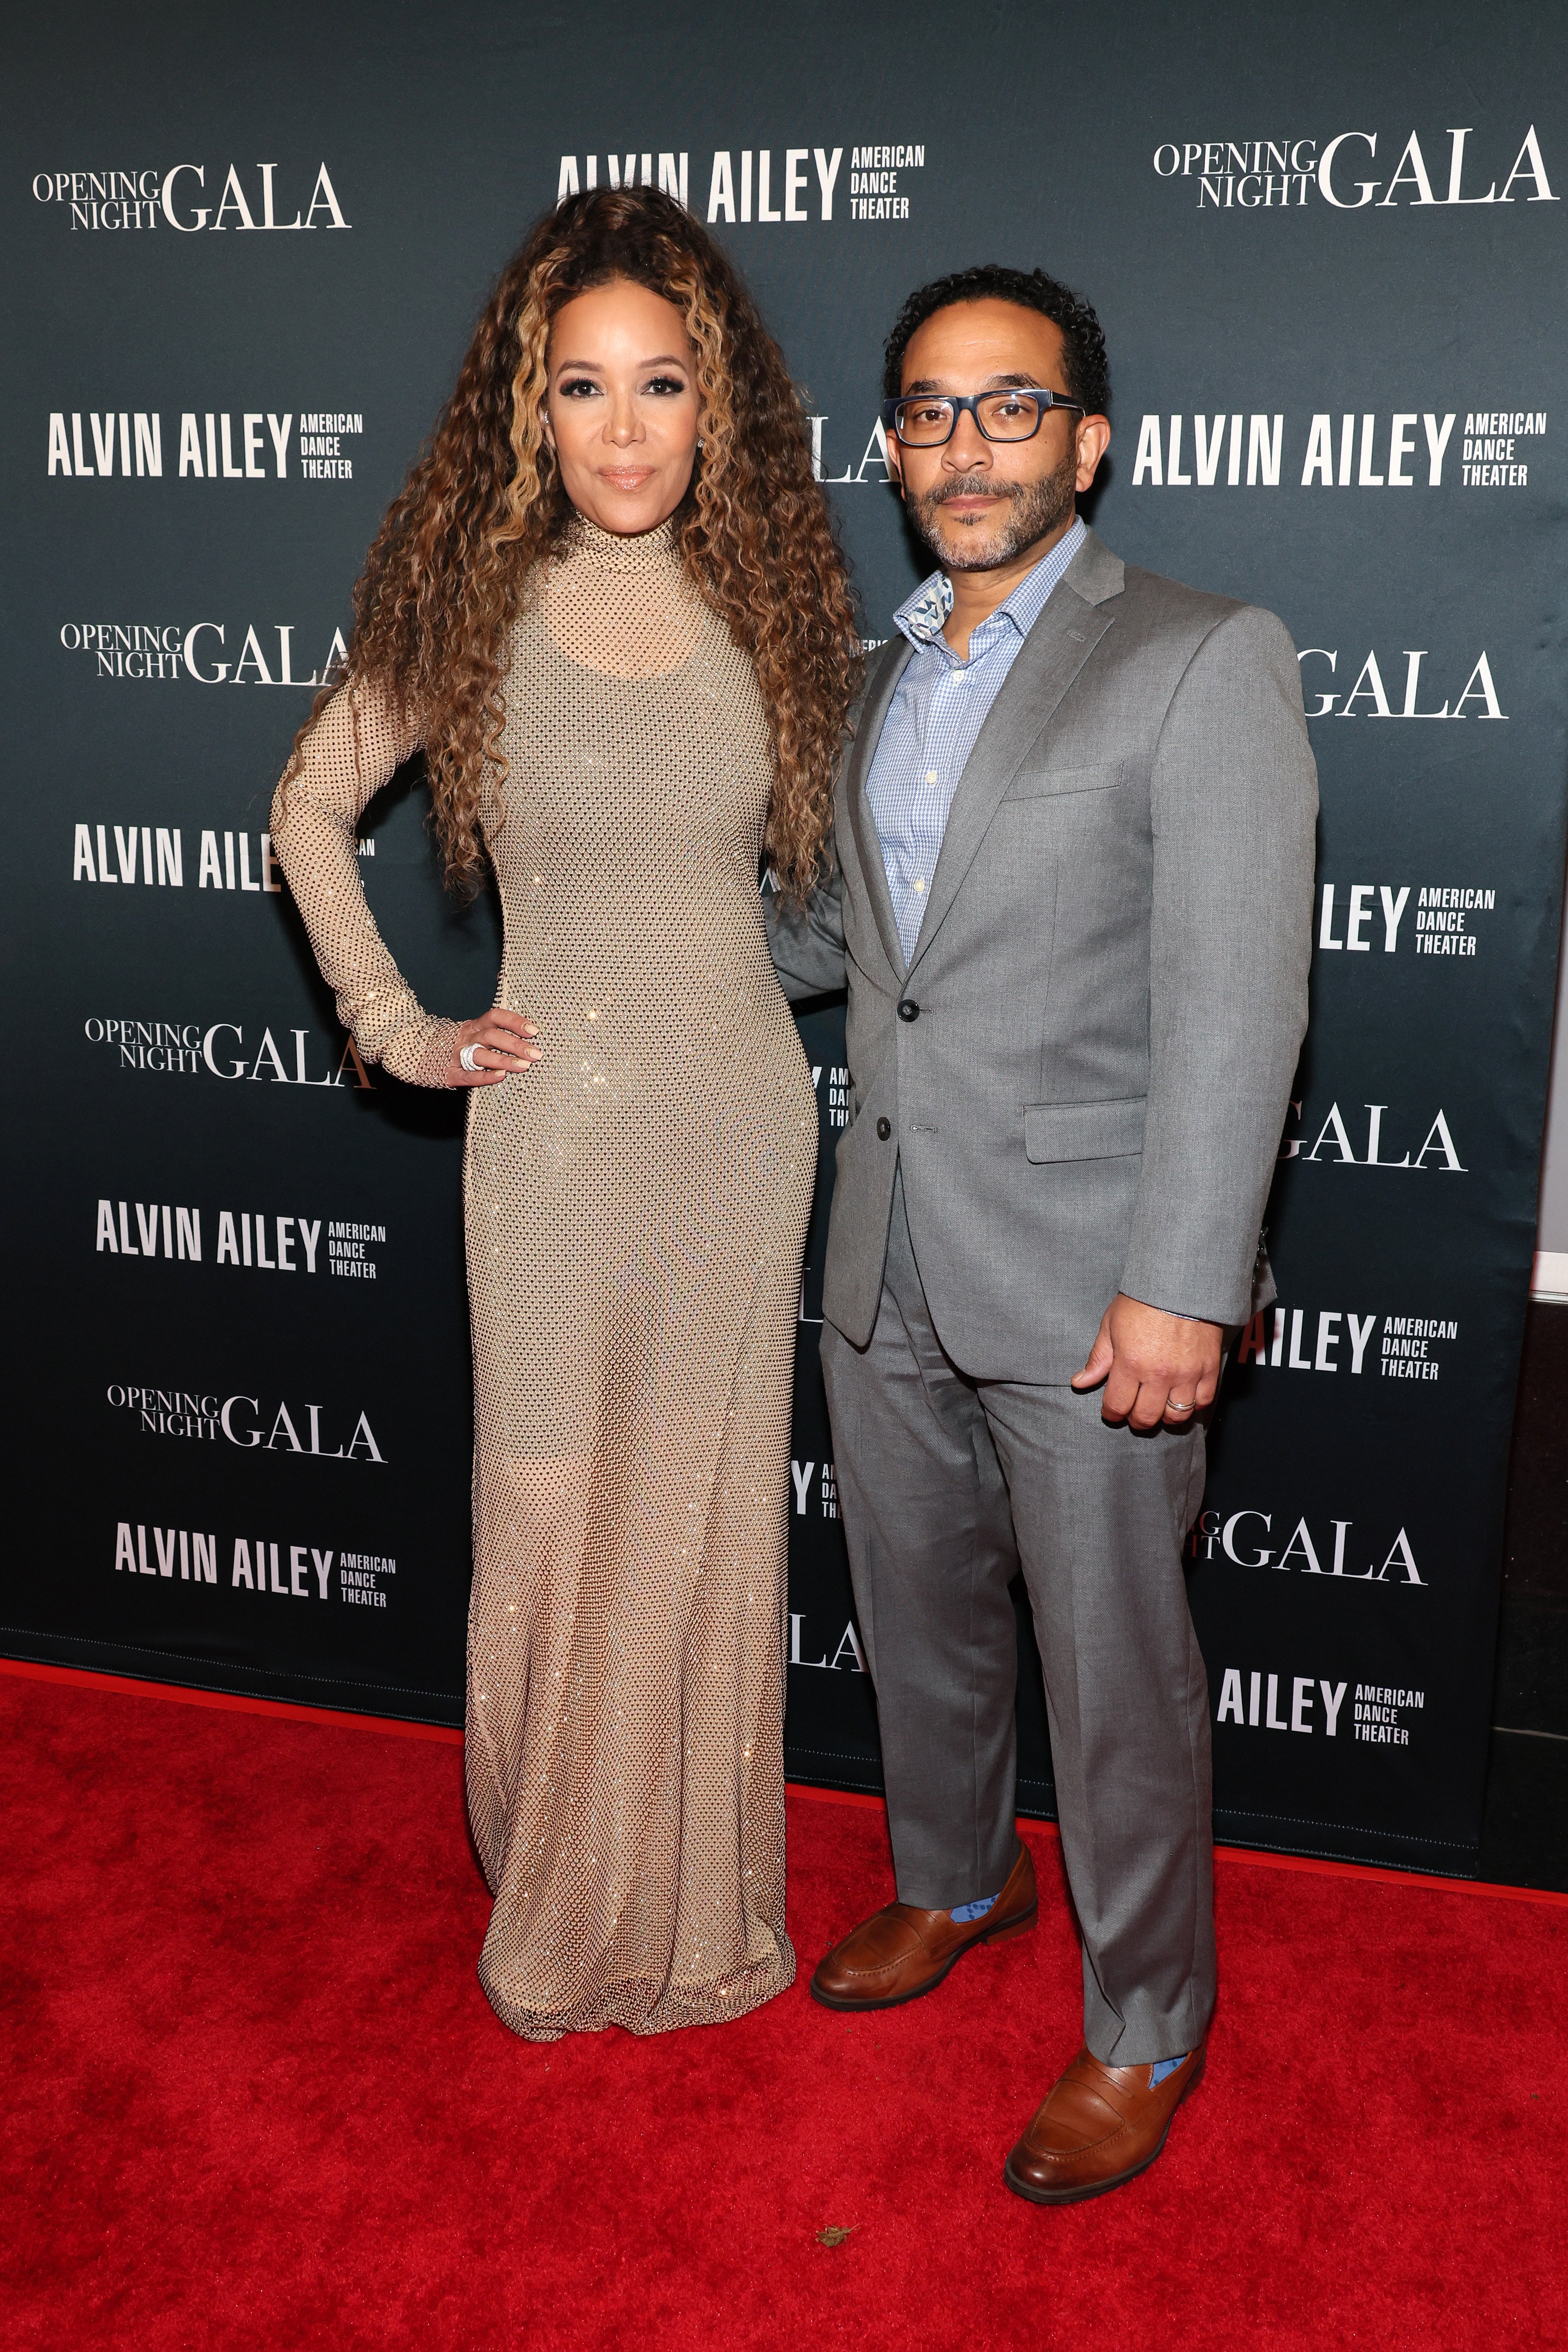 Sunny Hostin and Emmanuel Hostin at the opening night of Alvin Ailey American Dance Theater in New York City, on November 30, 2022. | Source: Getty Images